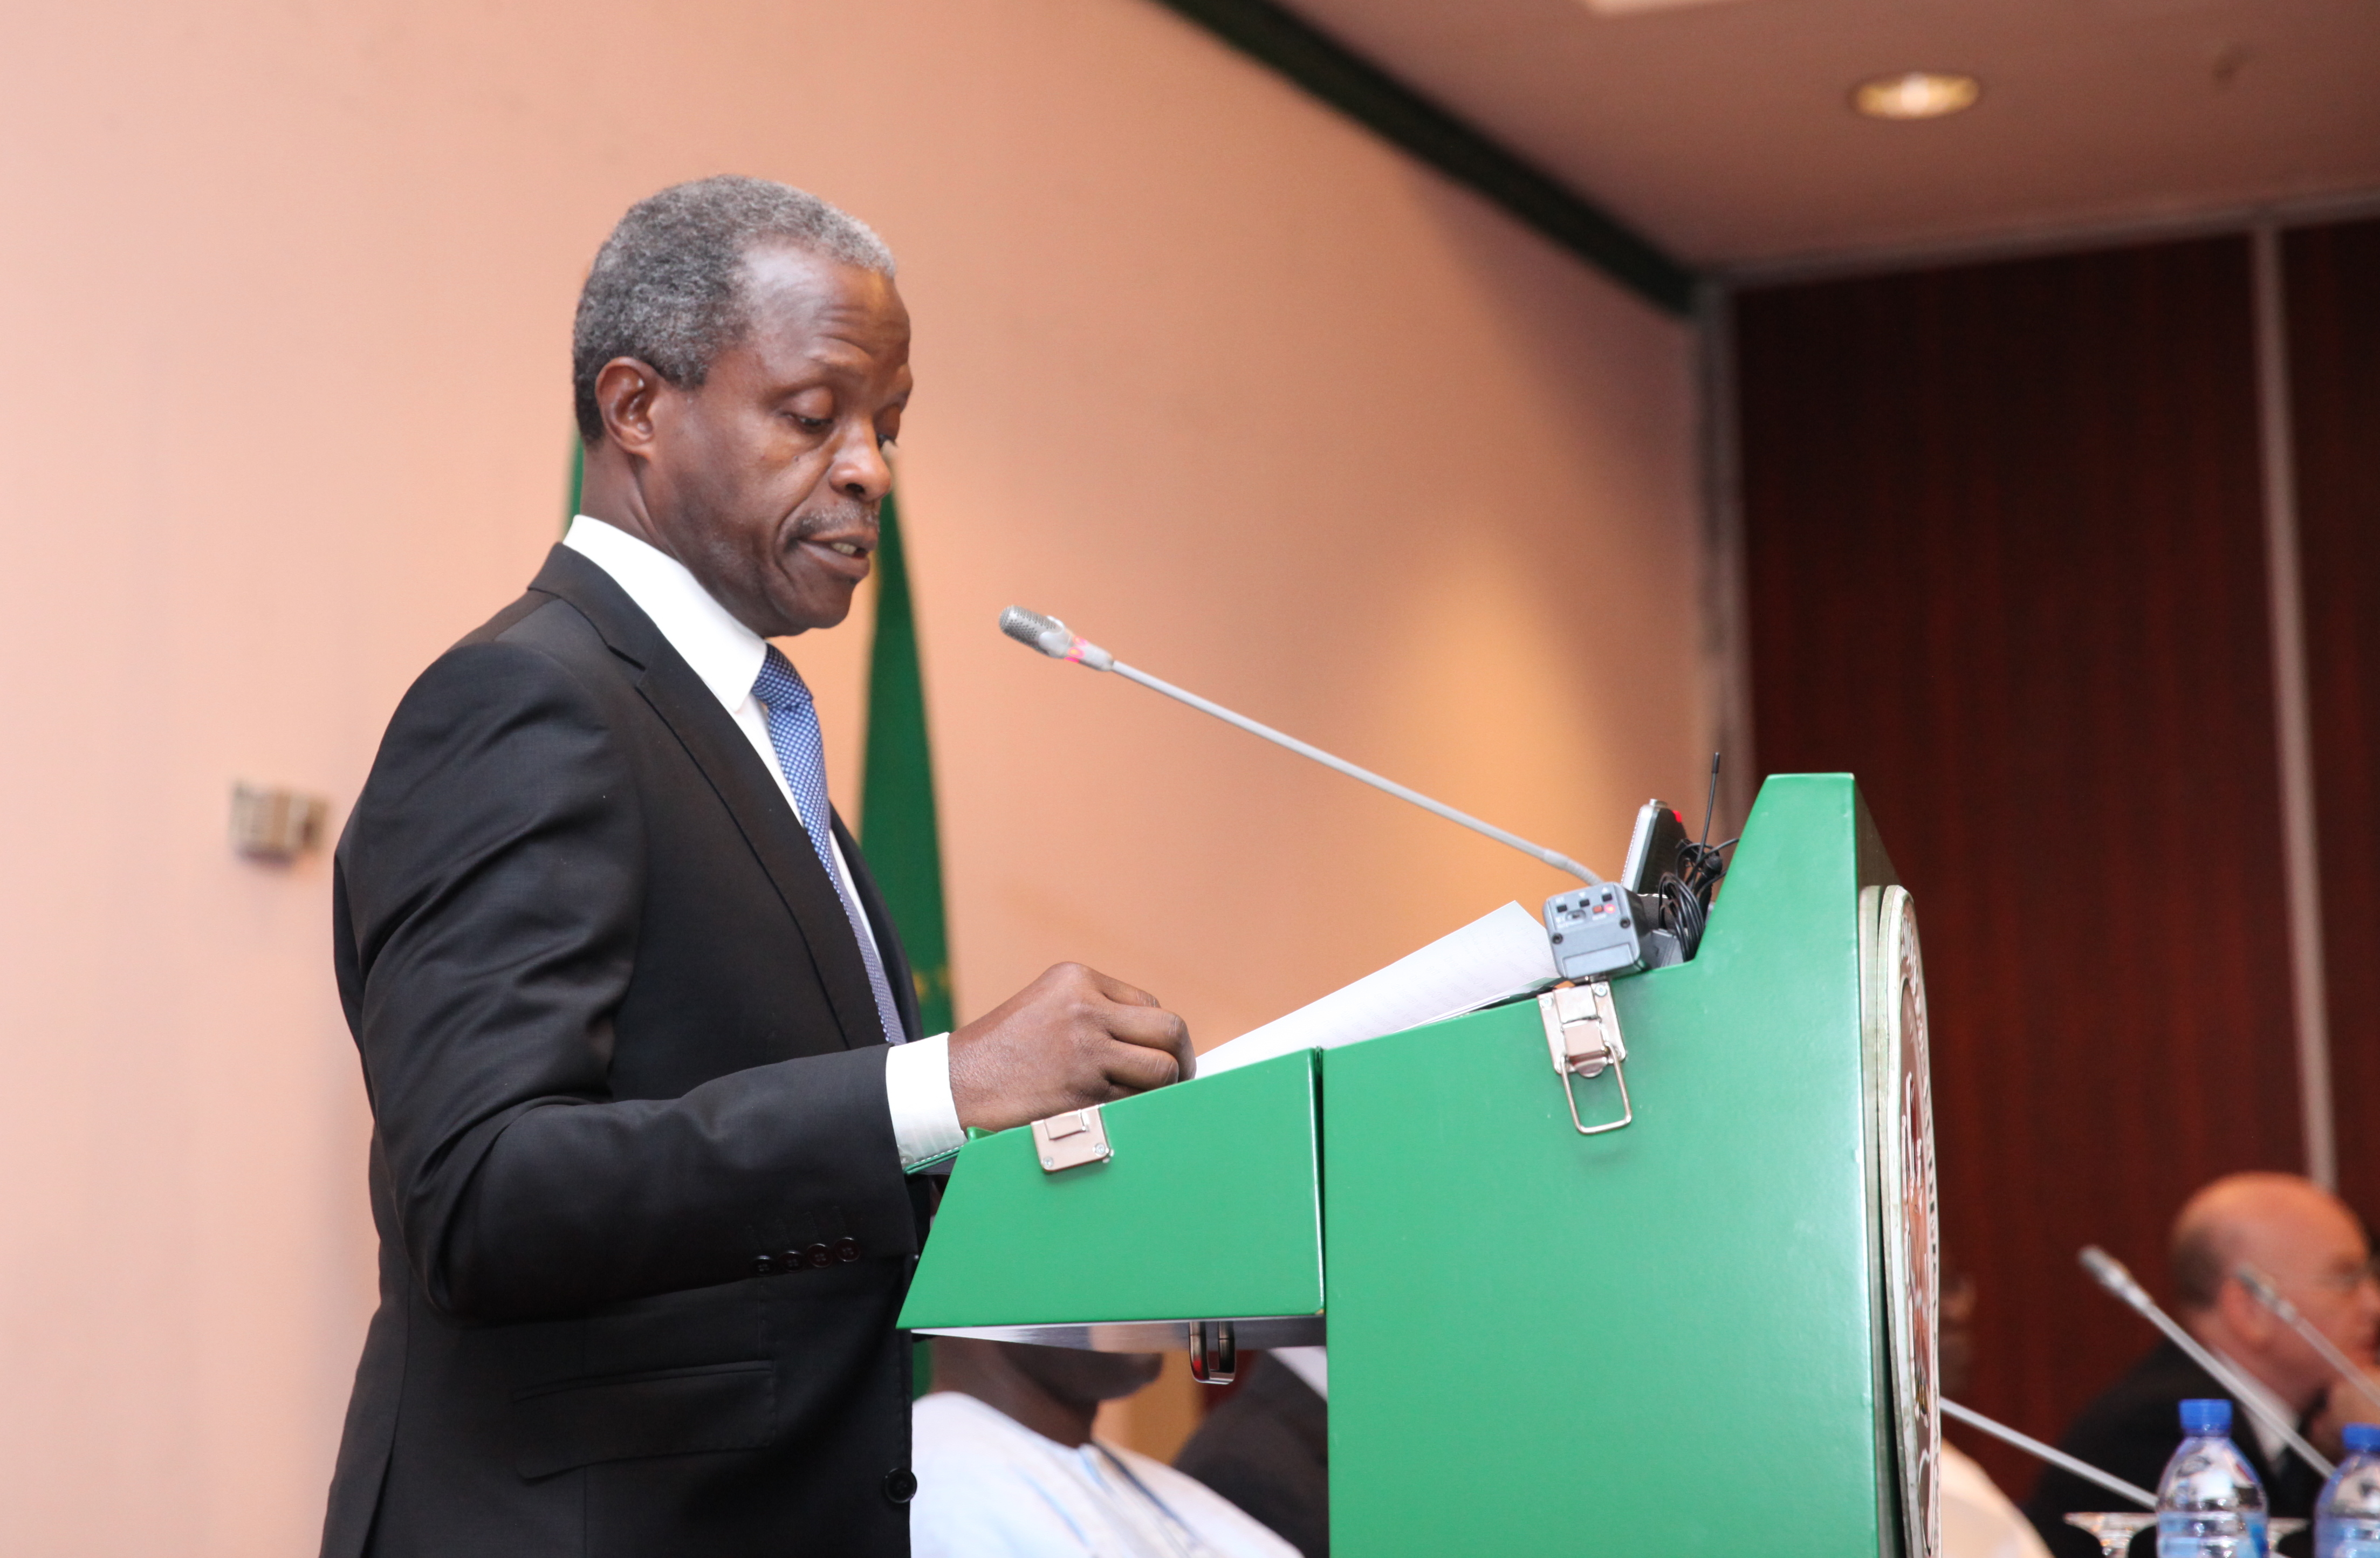 VP Osinbajo At Launch Of Global Commission’s Report On Confronting The Crisis Of Global Governance On 09/09/2015